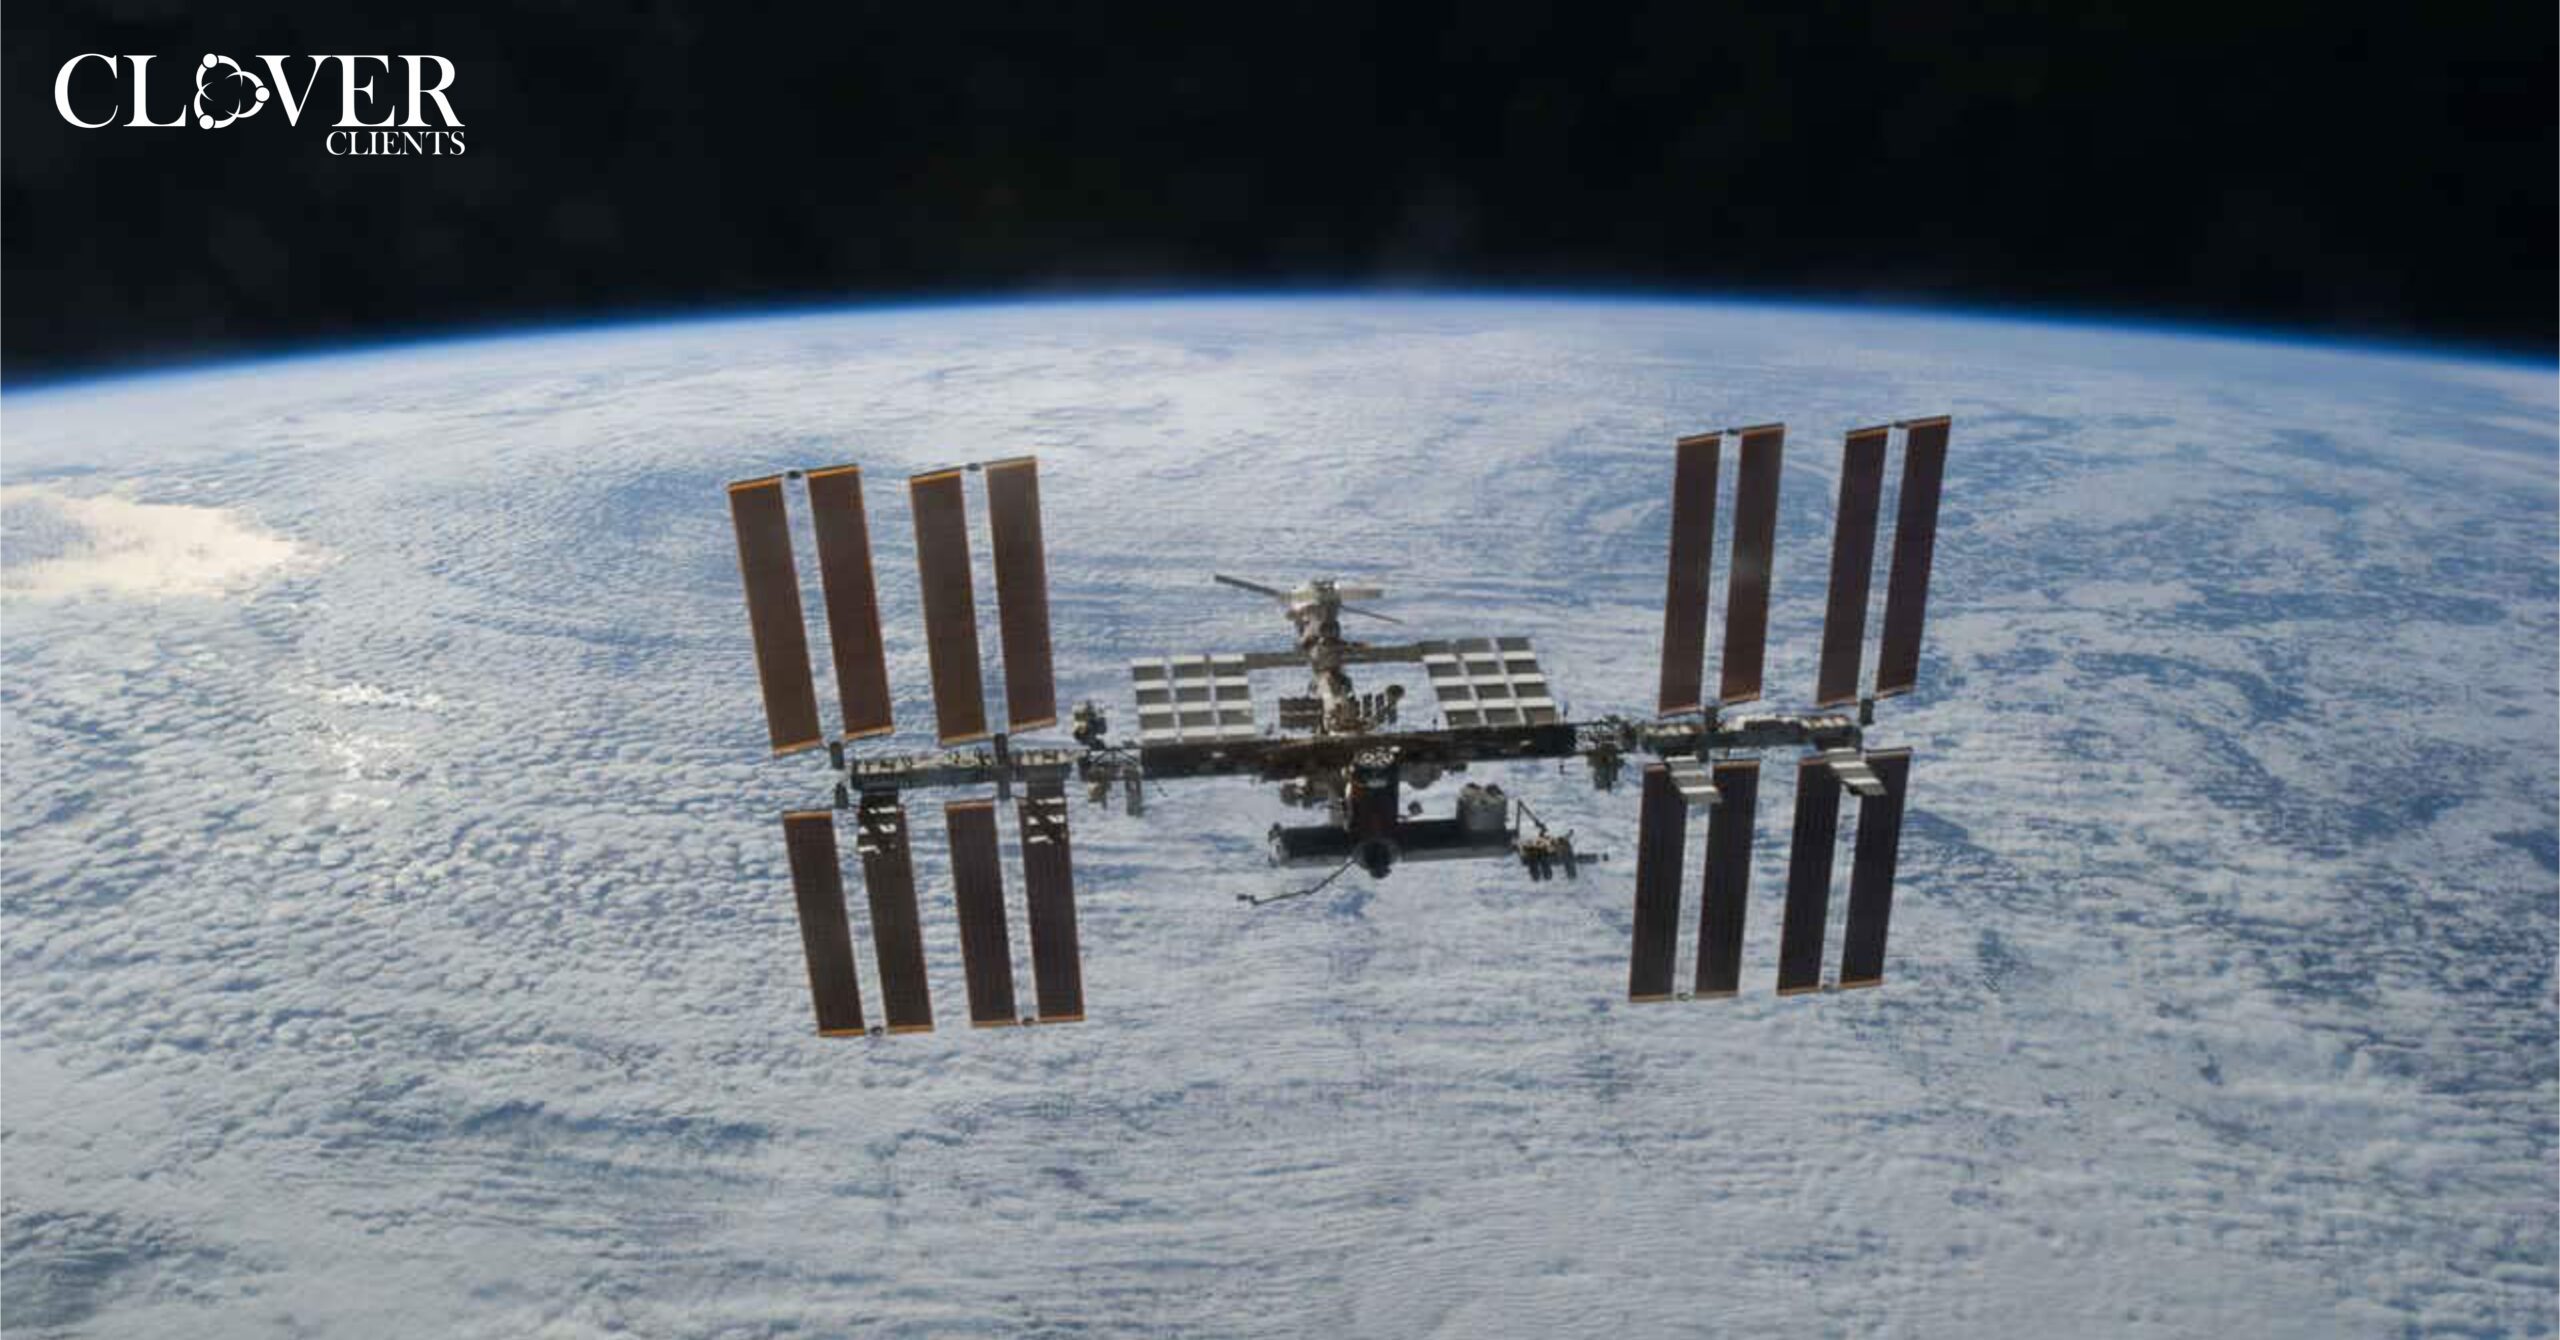 International Space Station Faced Power Loss For 90 Mins. NASA Uses Back Up.